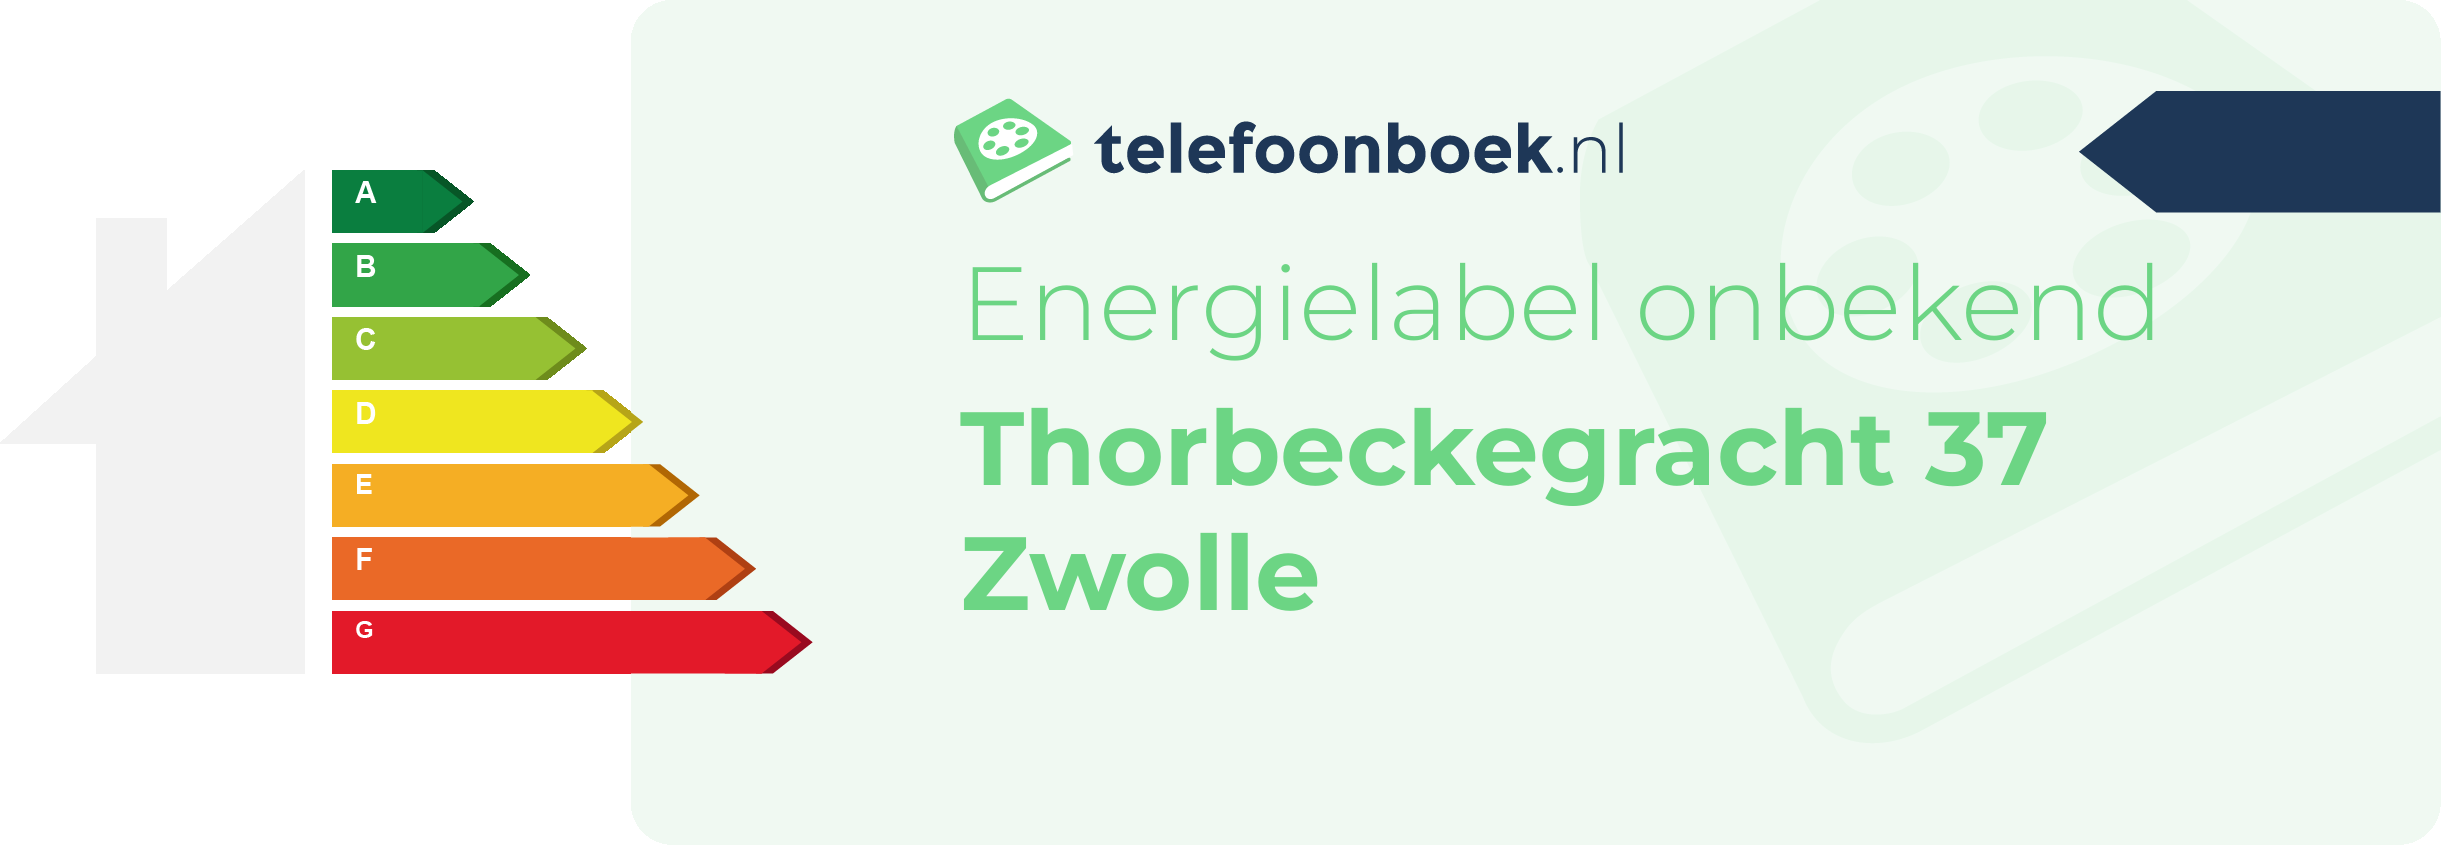 Energielabel Thorbeckegracht 37 Zwolle